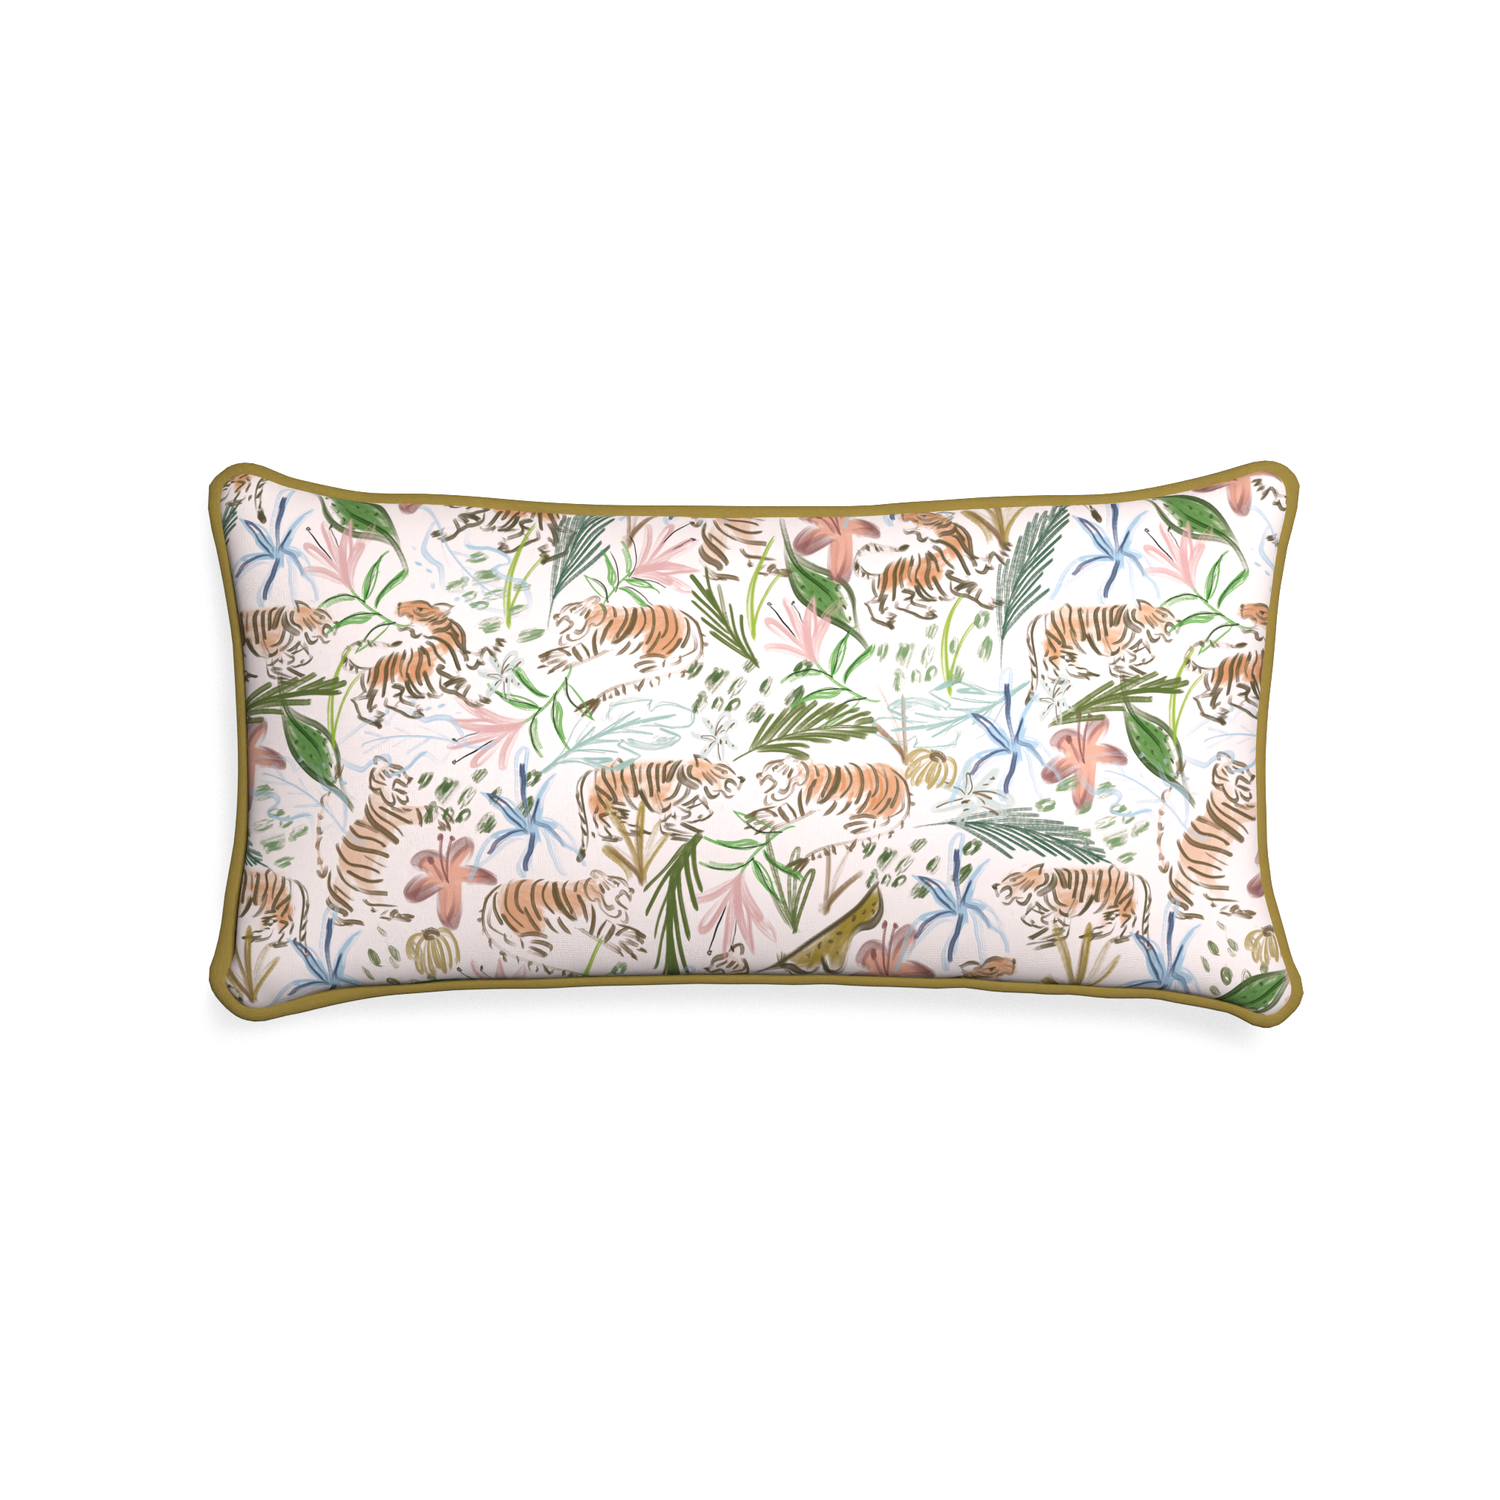 Midi-lumbar frida pink custom pink chinoiserie tigerpillow with c piping on white background